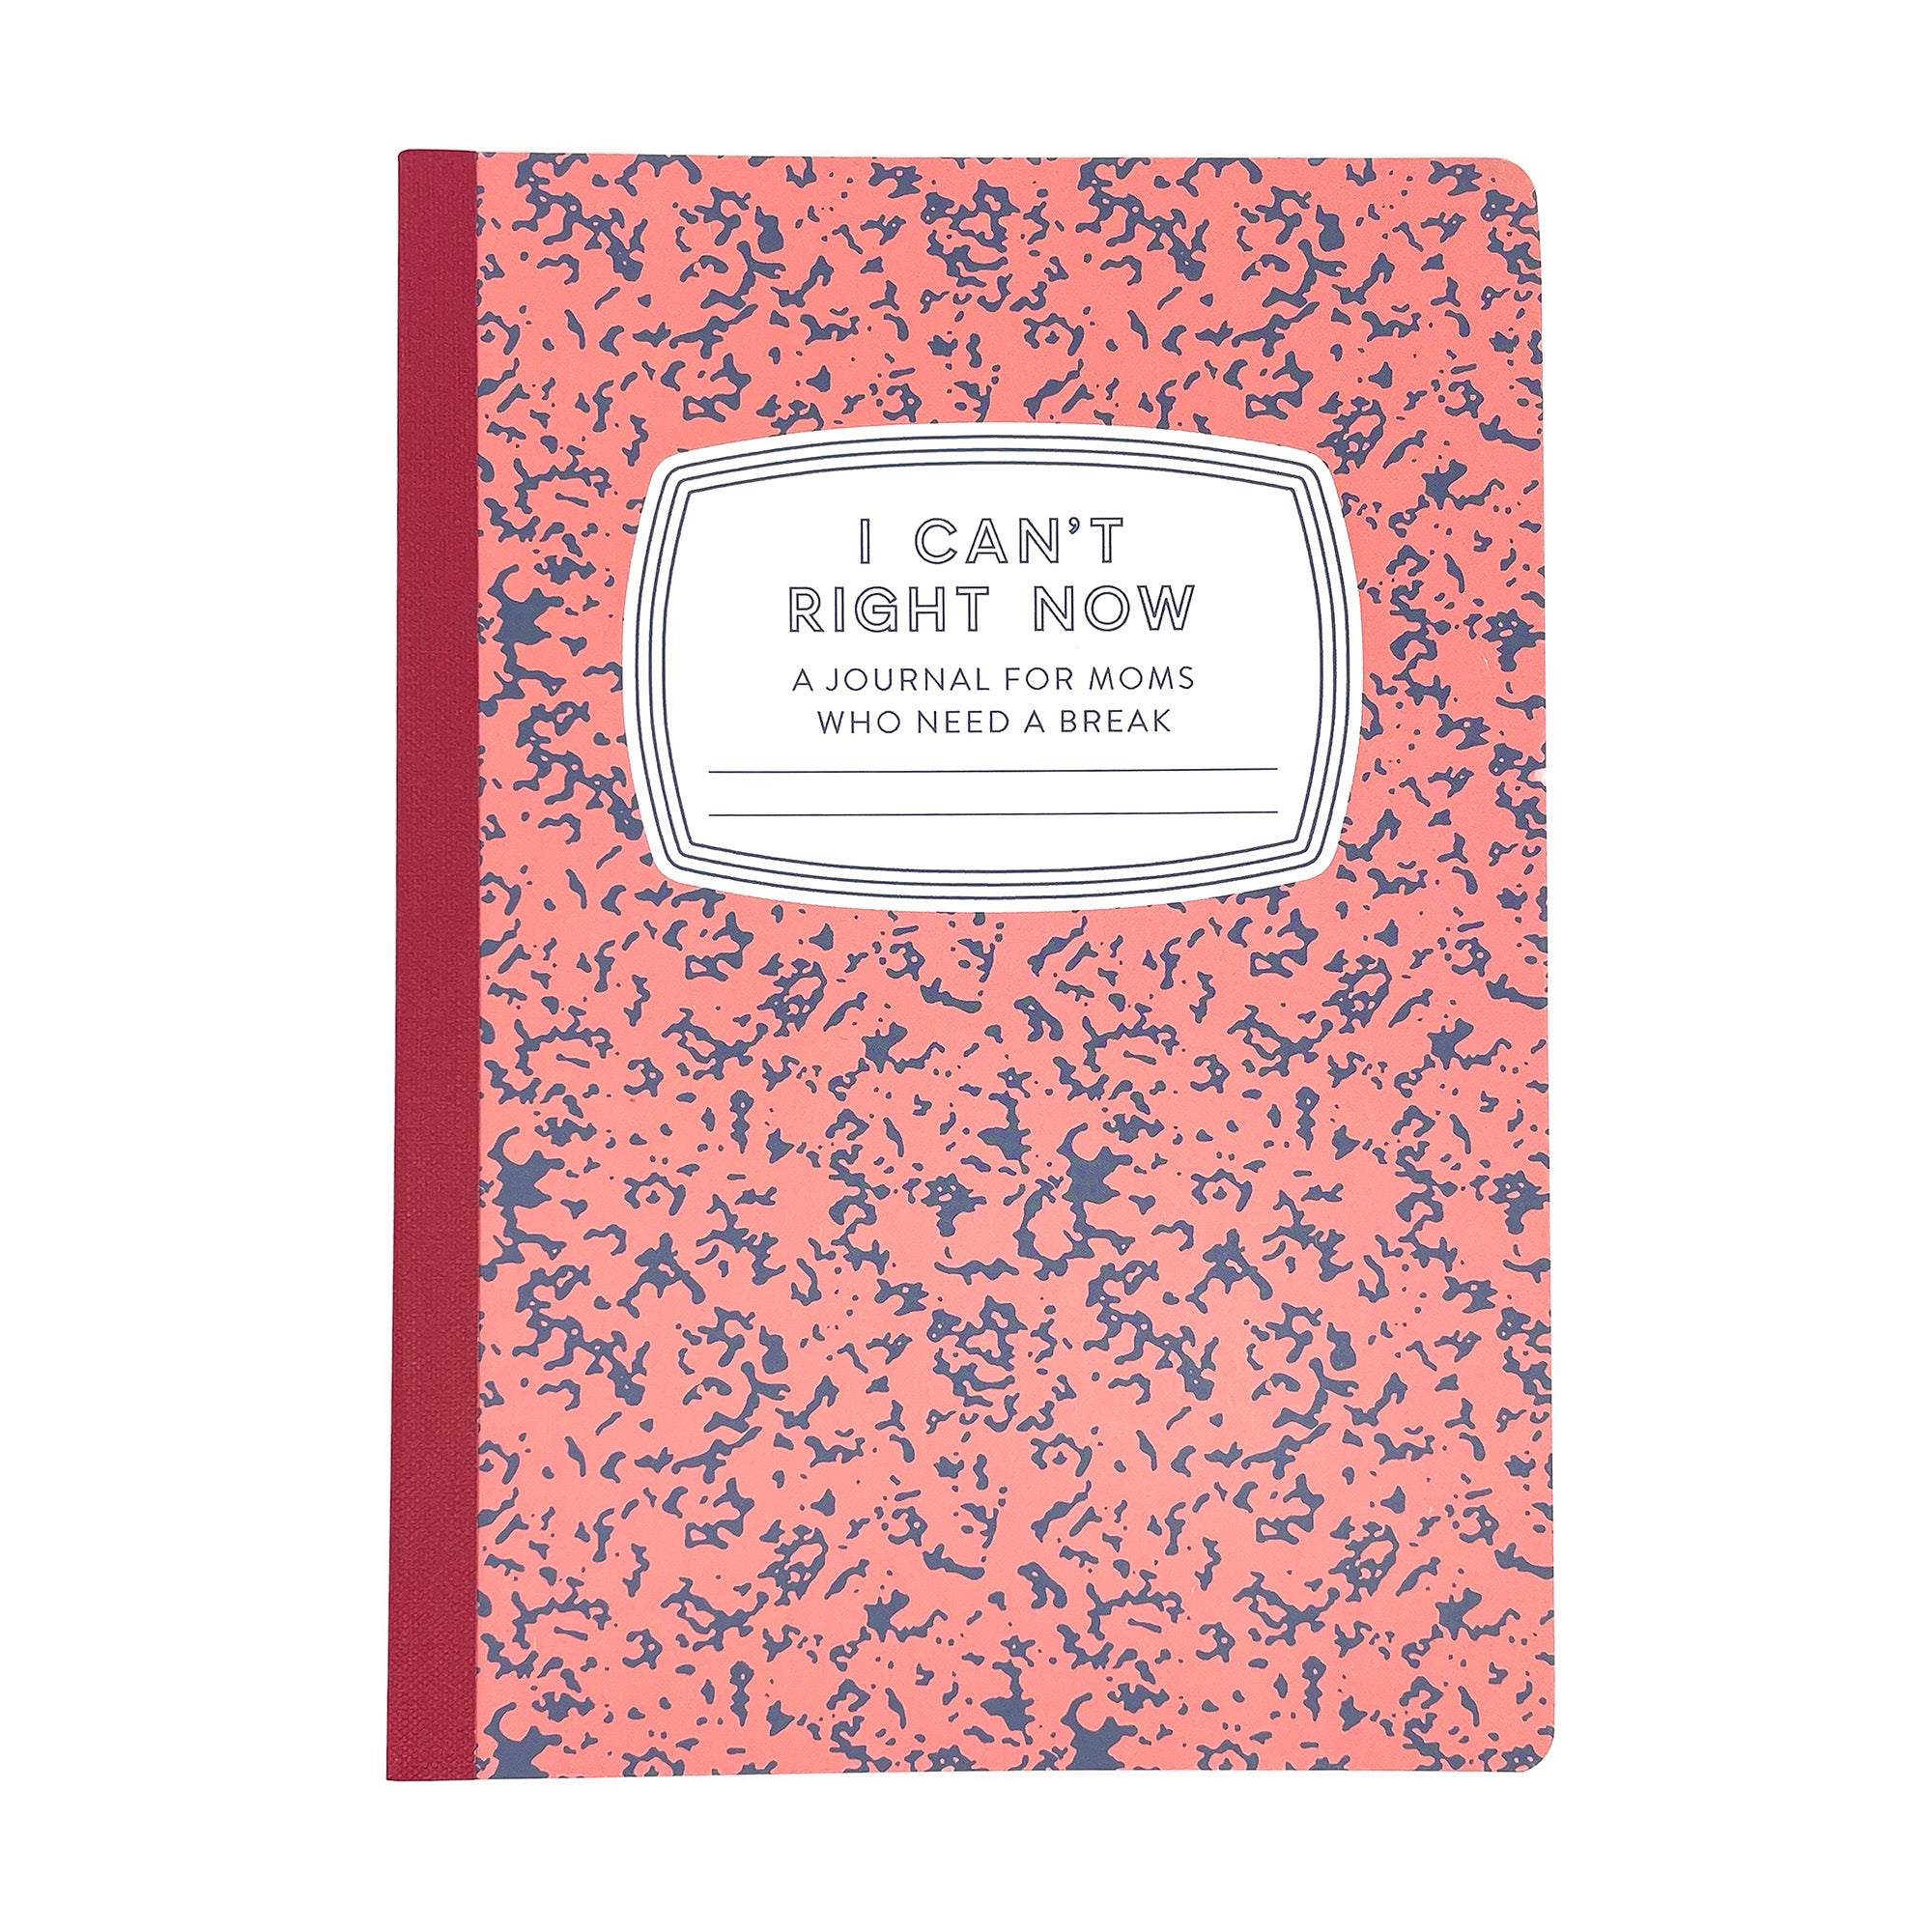 I Can't Right Now: A Journal for Moms Who Need a Break